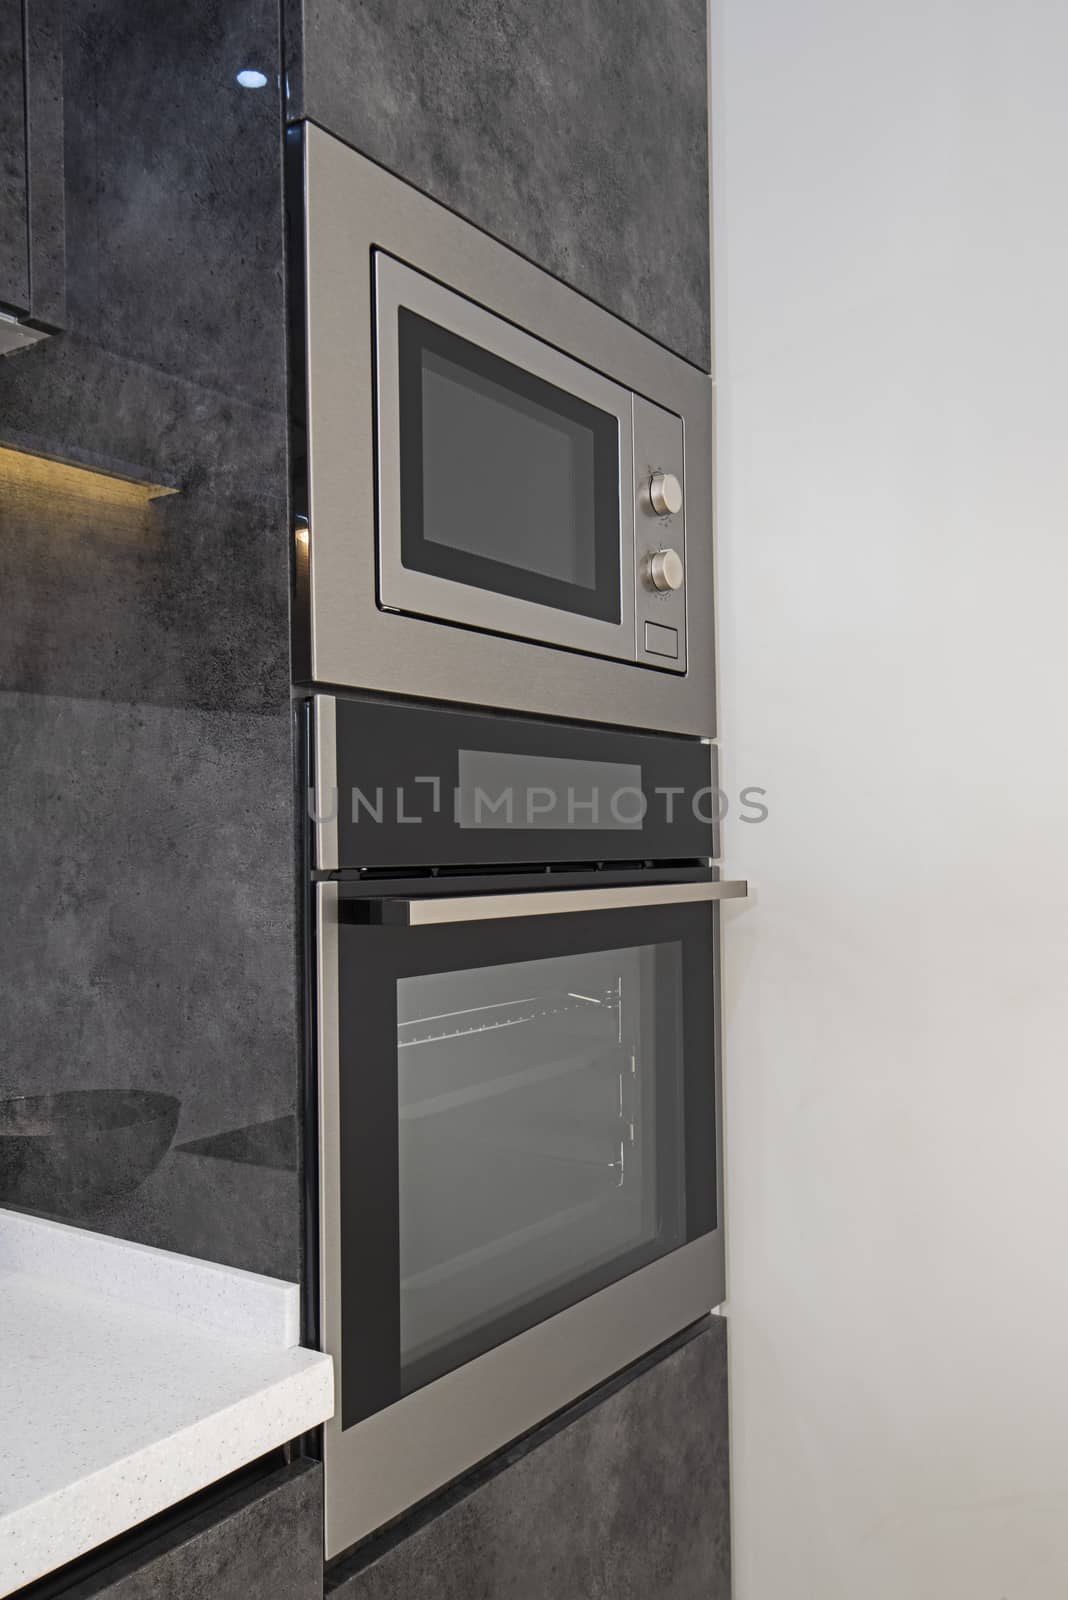 Interior design decor showing modern kitchen cooker oven with cupboards in luxury apartment showroom